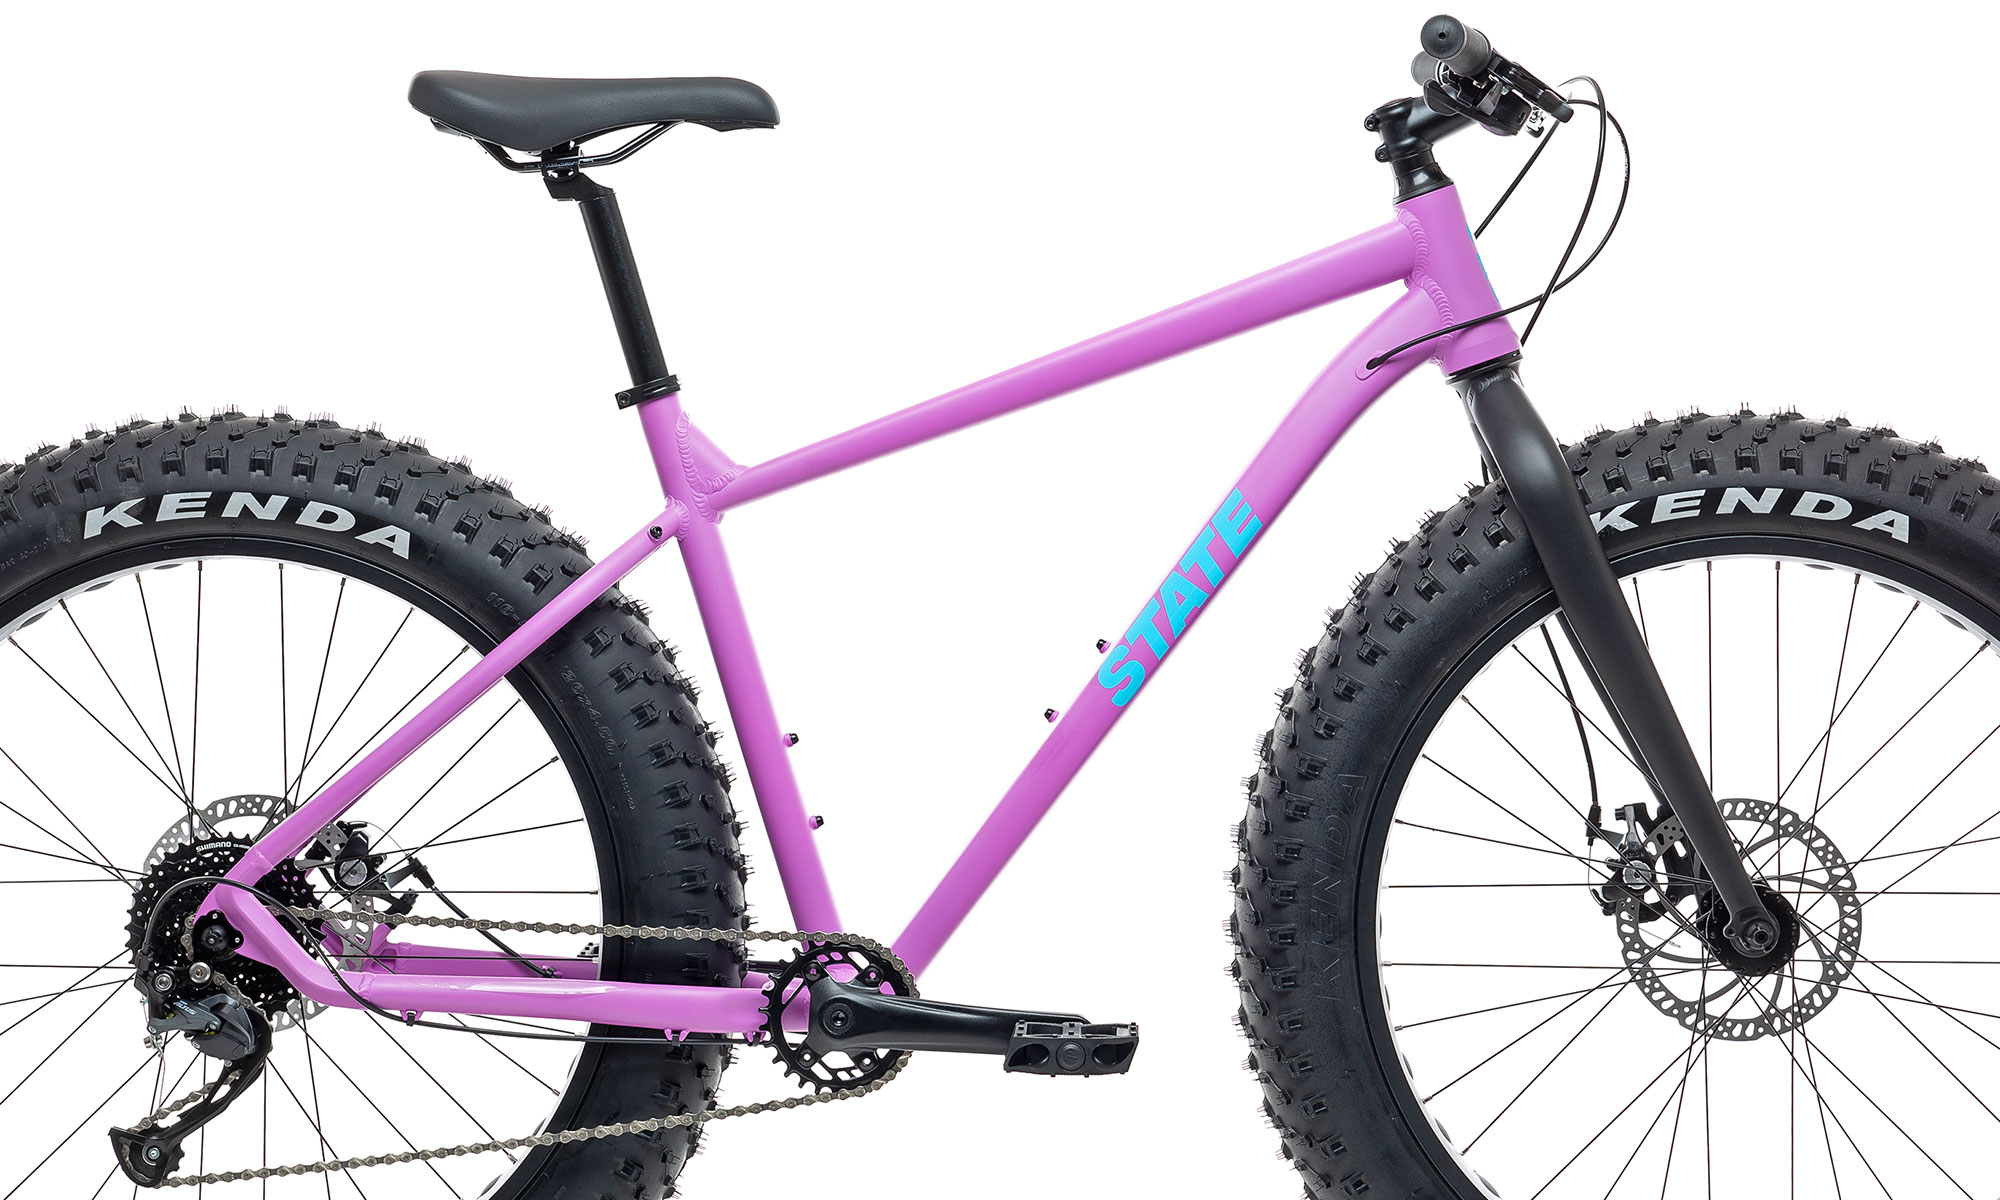 State Bicycle Co. 6061 Trail+ Fat Bike, an affordable alloy budget entry-level aluminum fatbike, frameset